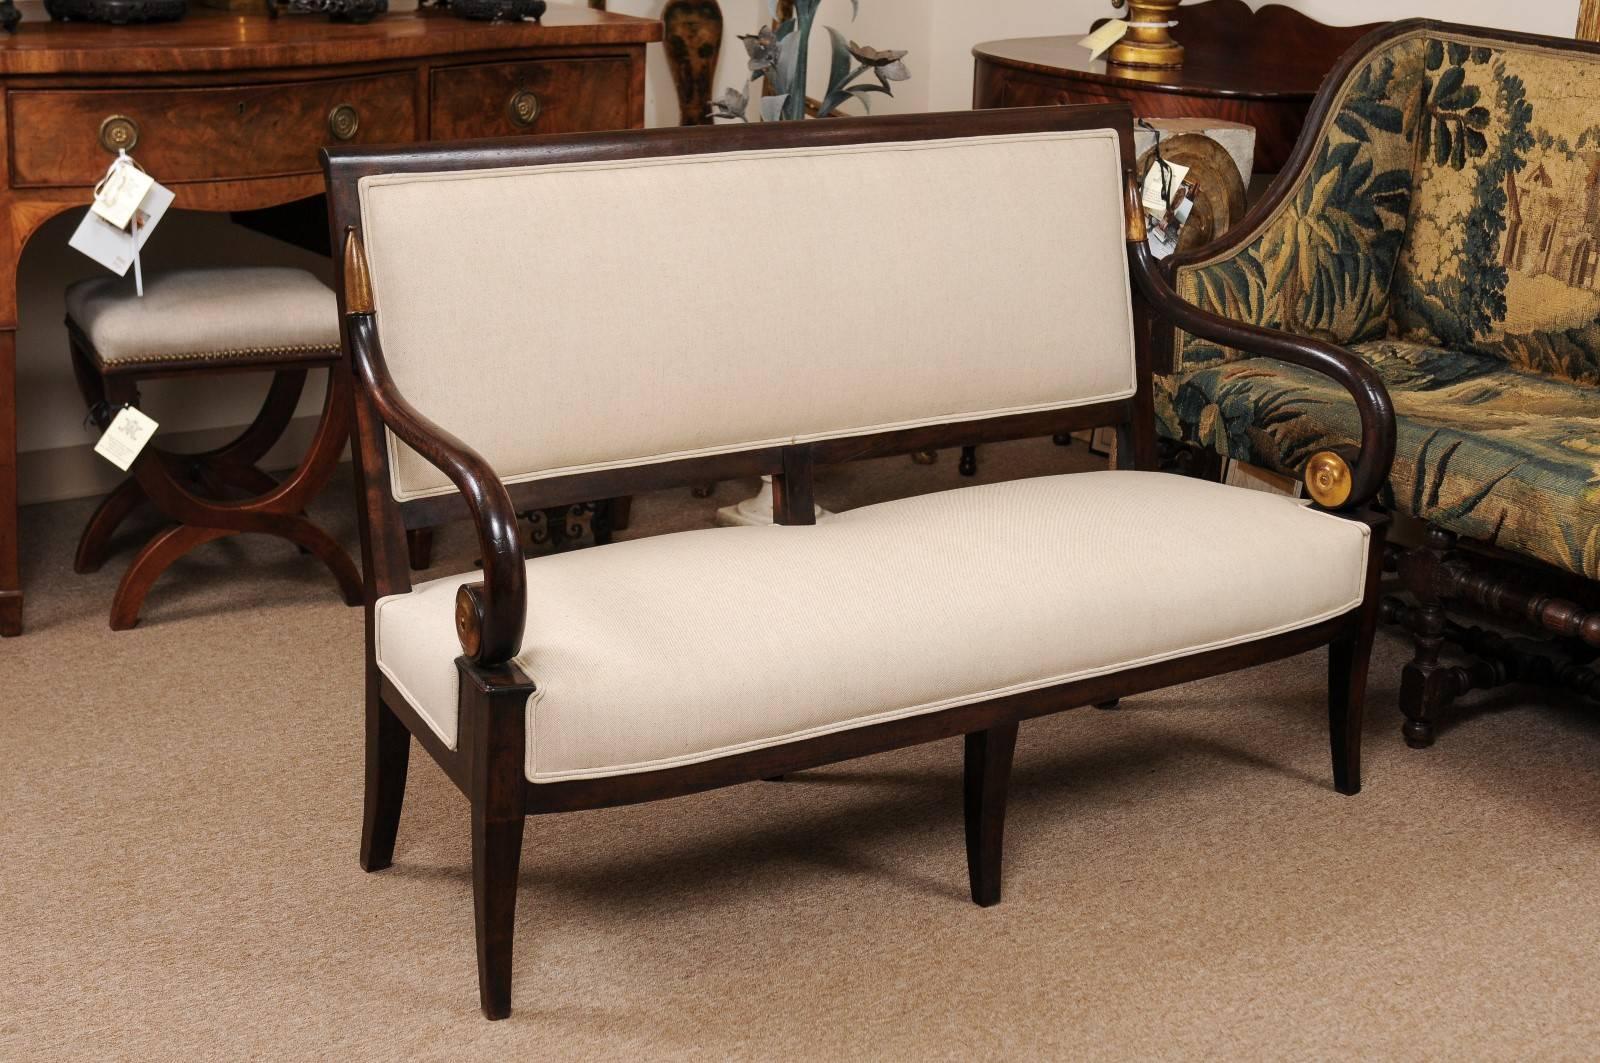 Linen 19th Century French Empire Mahogany Settee with Scroll Arms and Gilt Detail